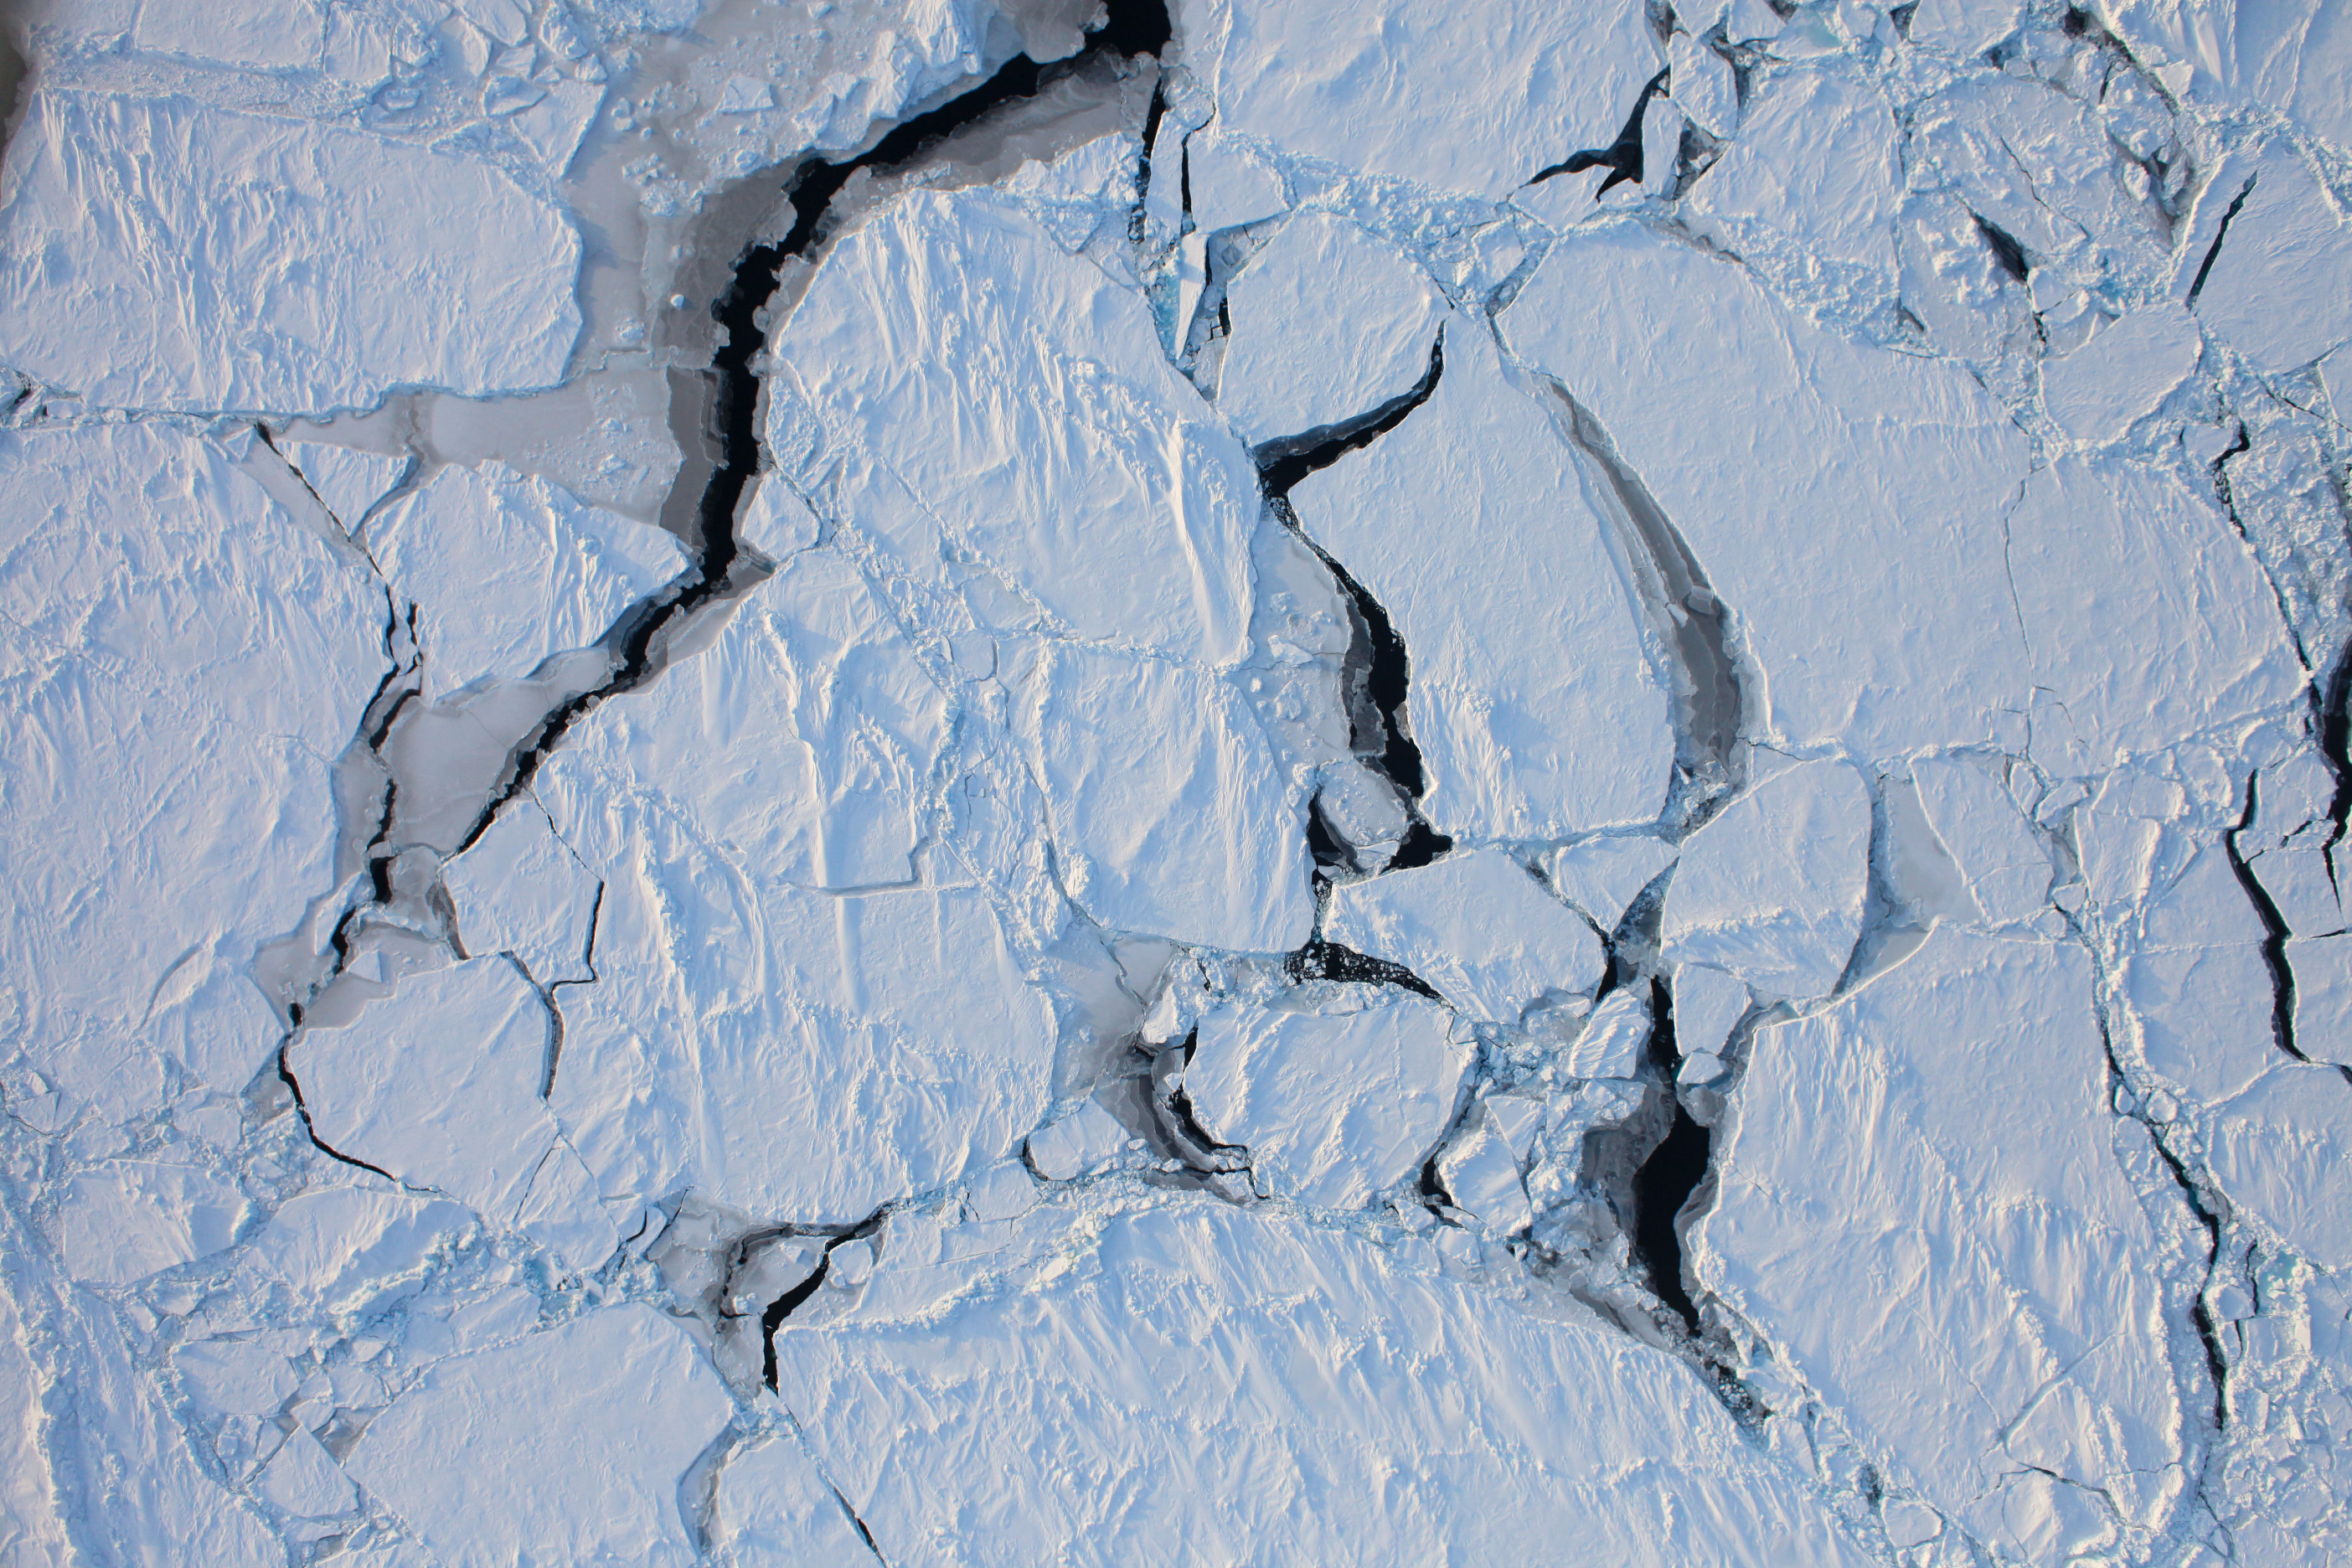 White-colored sea ice is shown with many dark-colored cracks.